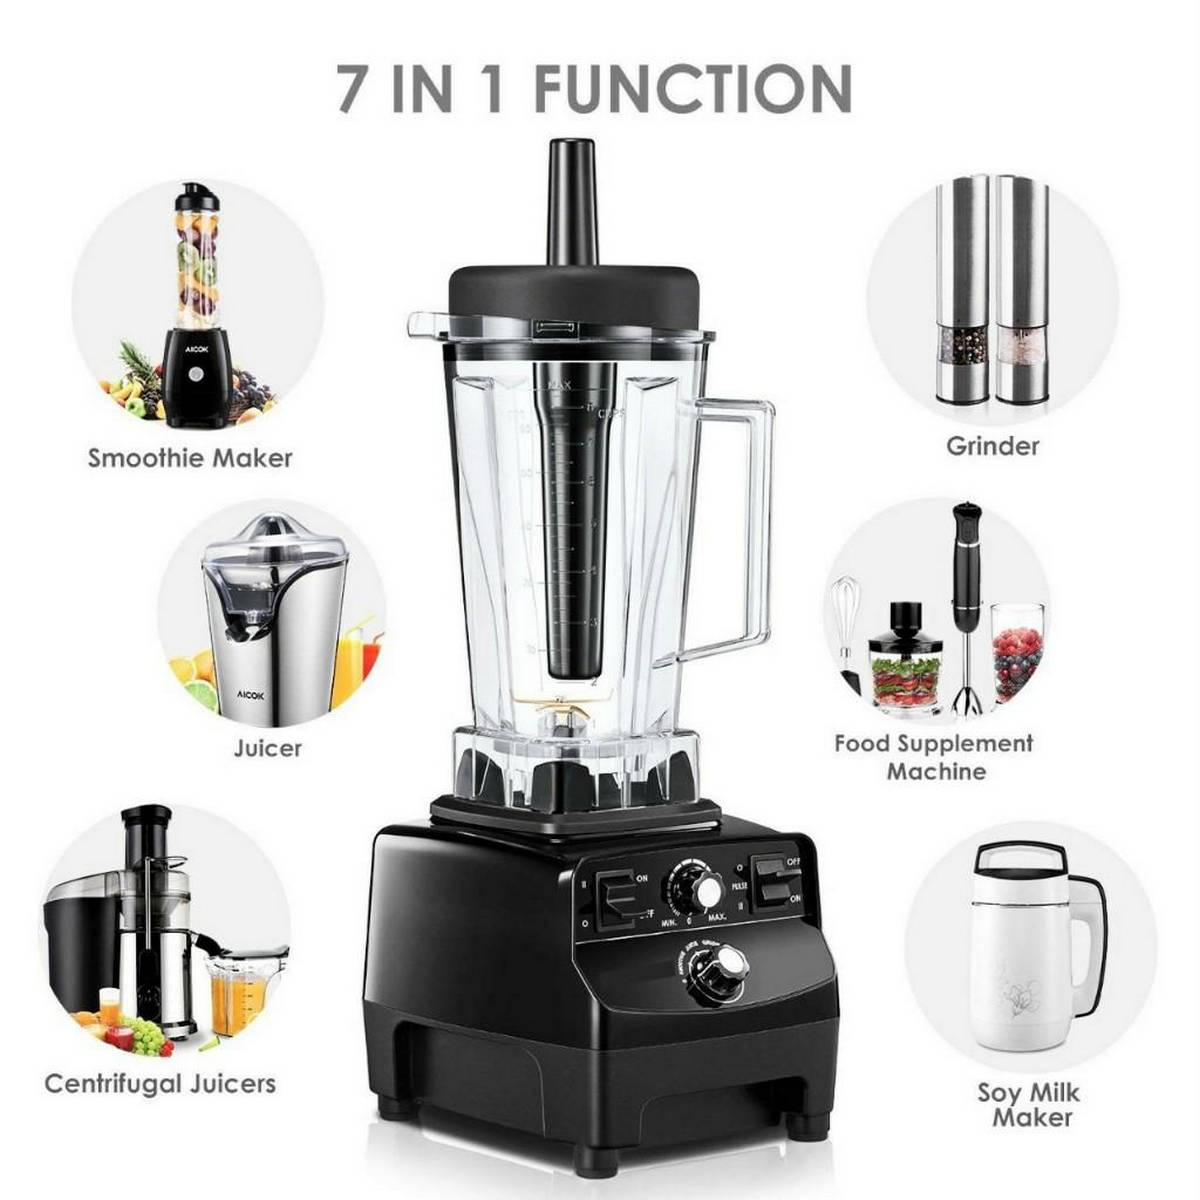 High Power Commercial Smoothie Vacuum Blender: Buy Online at Best Prices in  Pakistan 